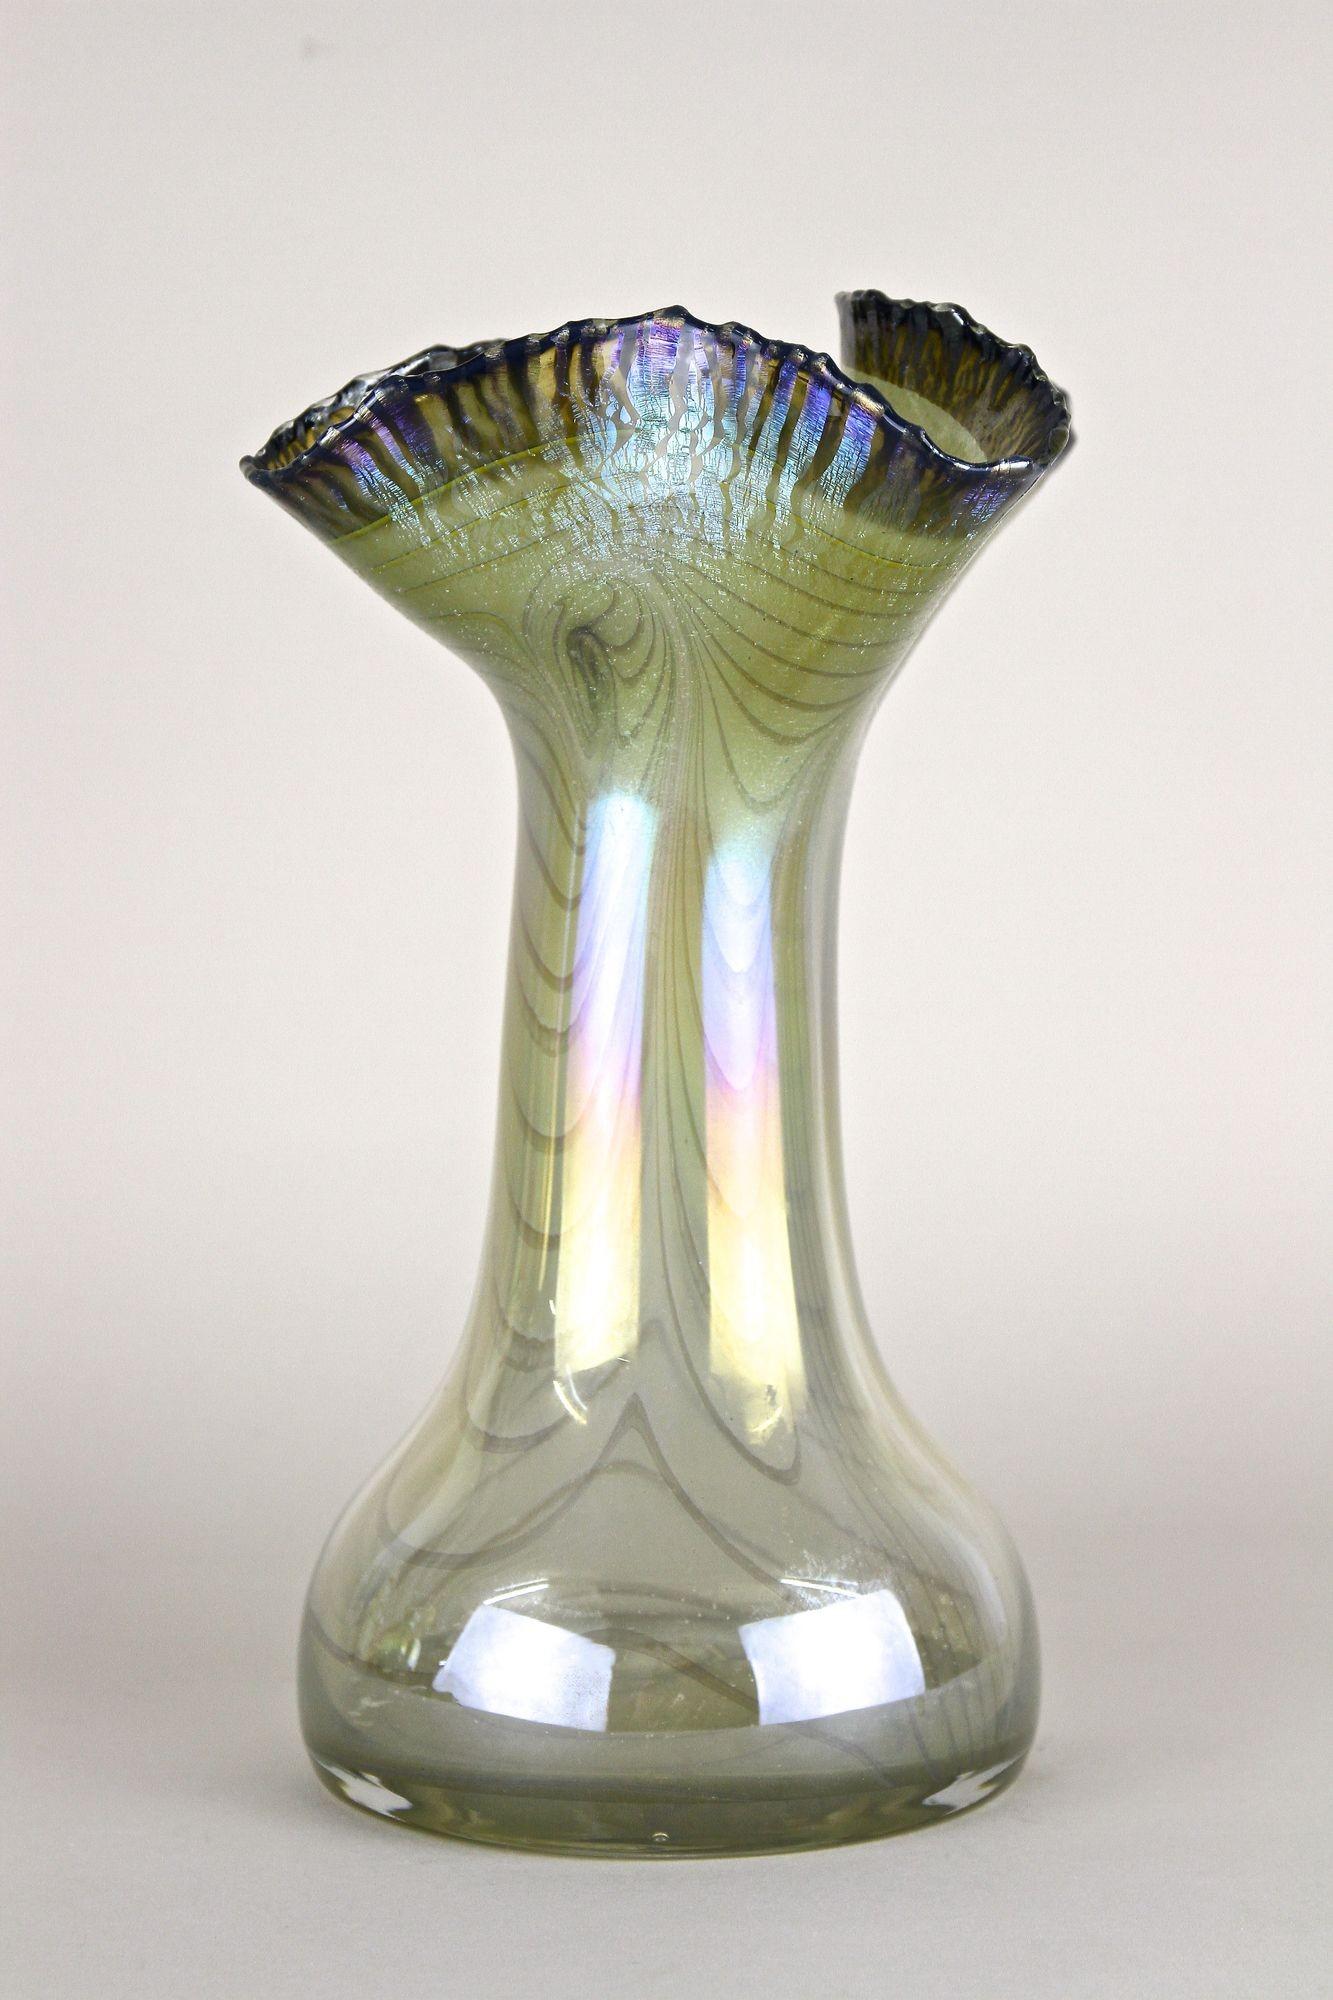 20th Century Iridescent Glass Vase by E. Eisch - Signed, Germany 1982 For Sale 7